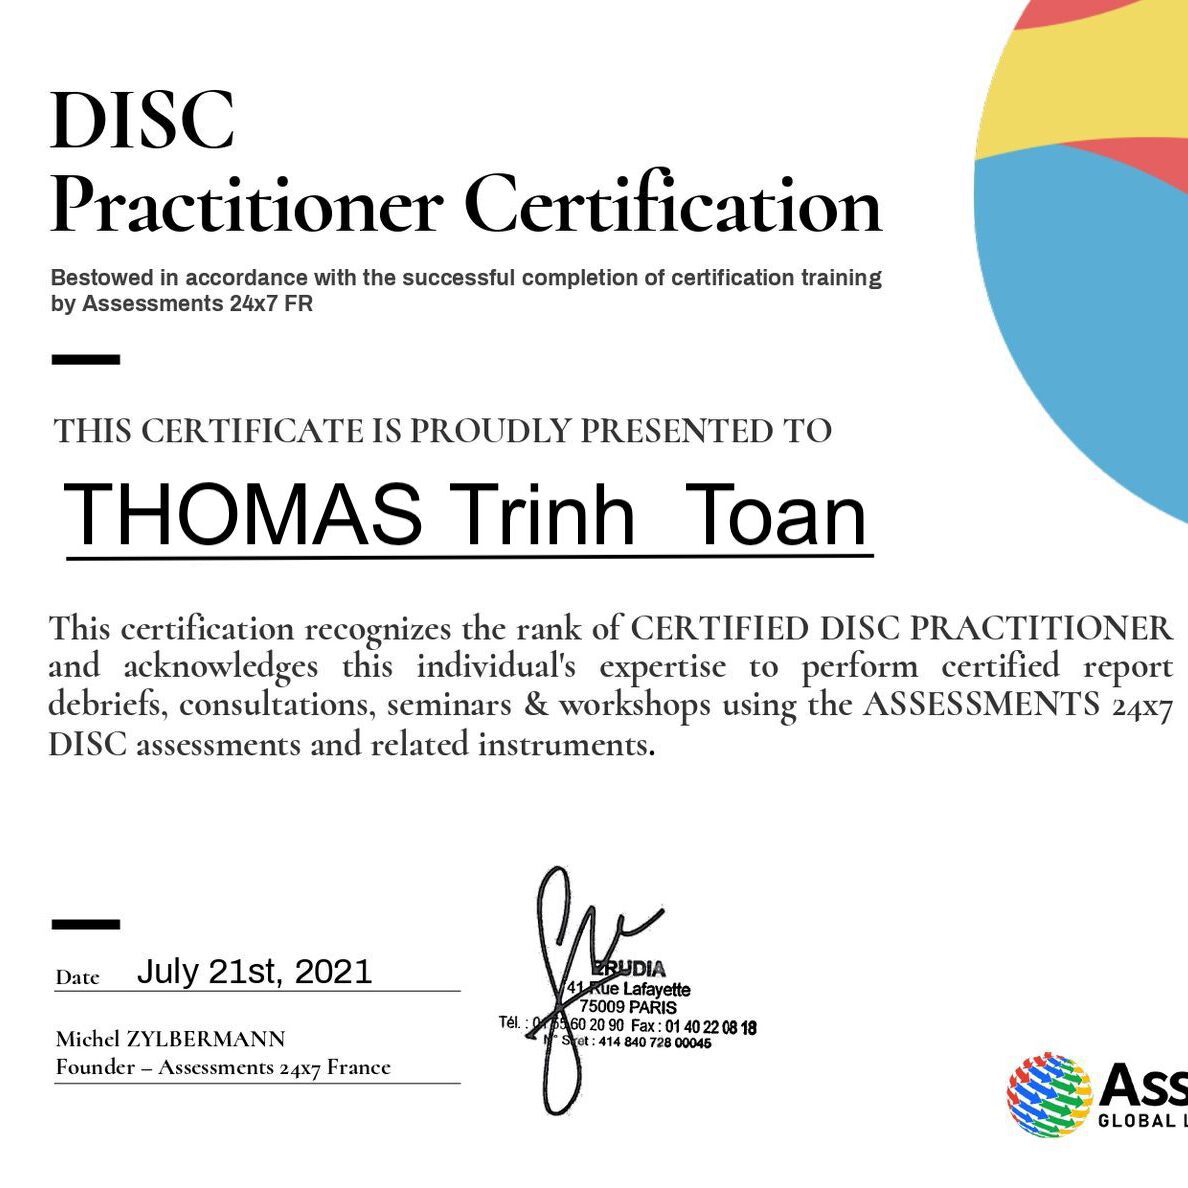 DISC Practitioner Thomas Trinh Toan